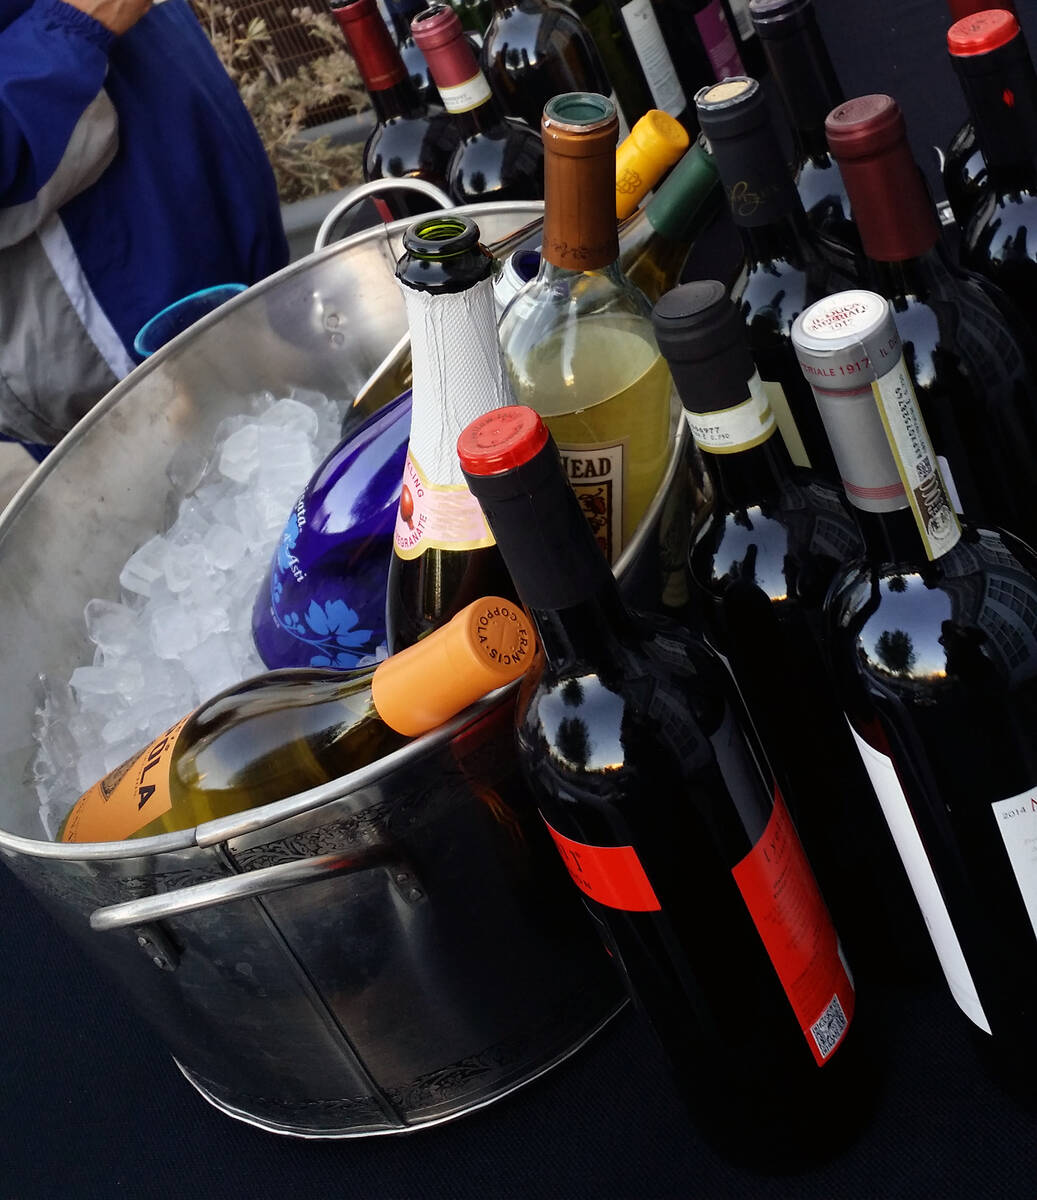 The Best Dam Wine Walk will take place in more than 20 business Saturday from 4-8 p.m.